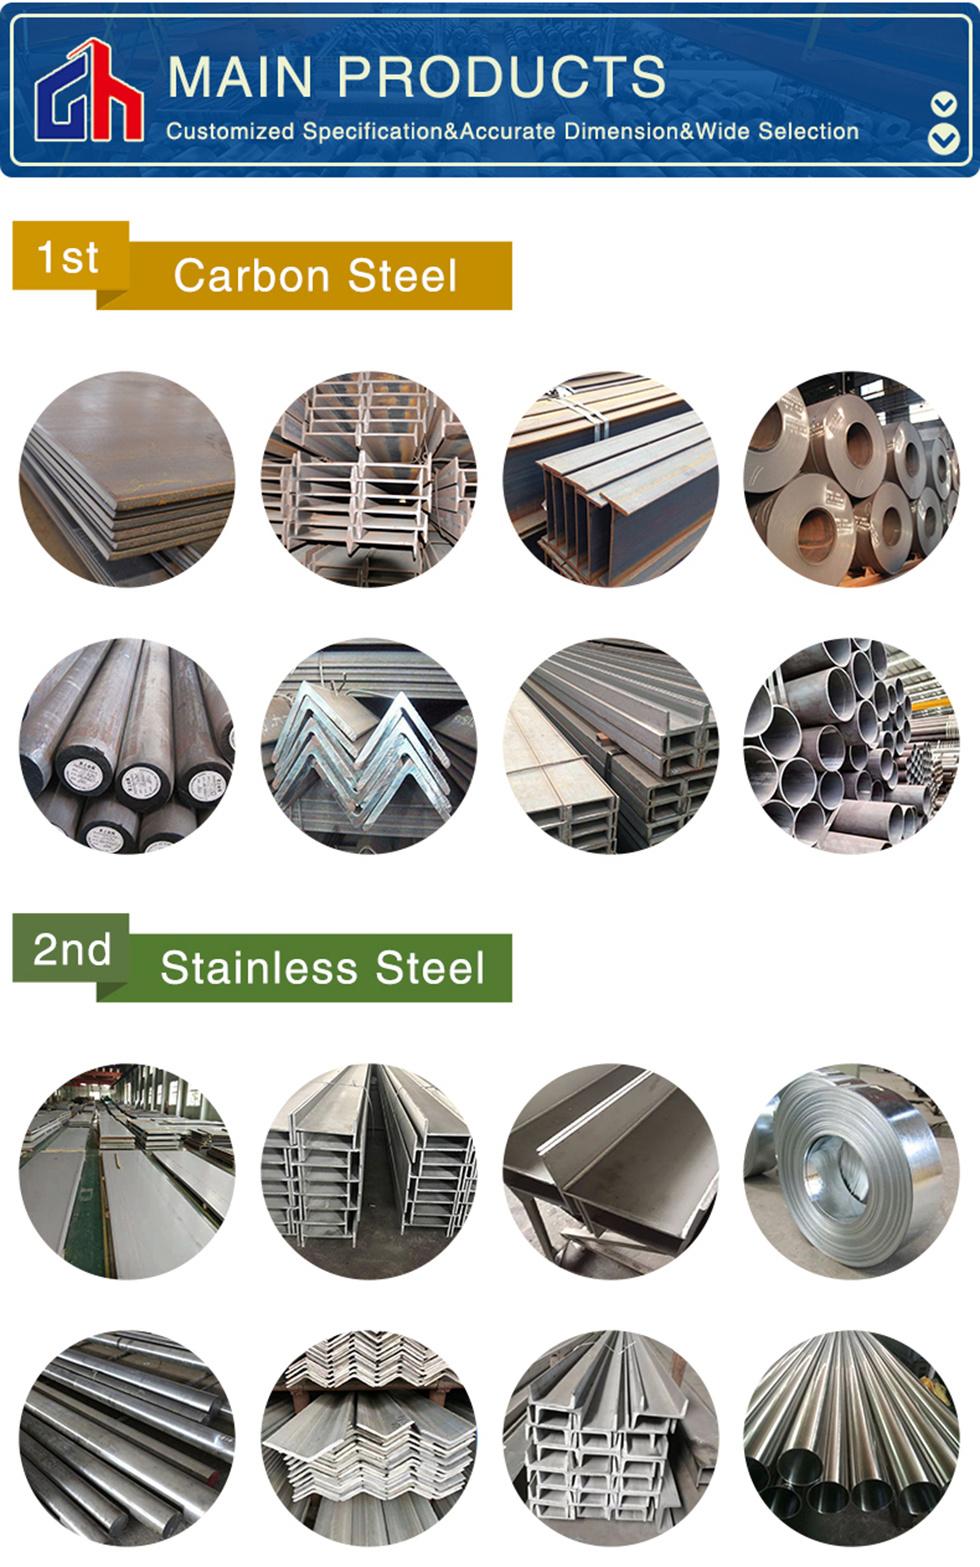 Stainless/Seamless/Galvanized/Spiral/Welded/Copper/Oil/Casing/Alloy/Square/Round/Aluminum/Precision/Black/Carbon/Oval/Cold Drawn/Tube/Line/Steel Pipe